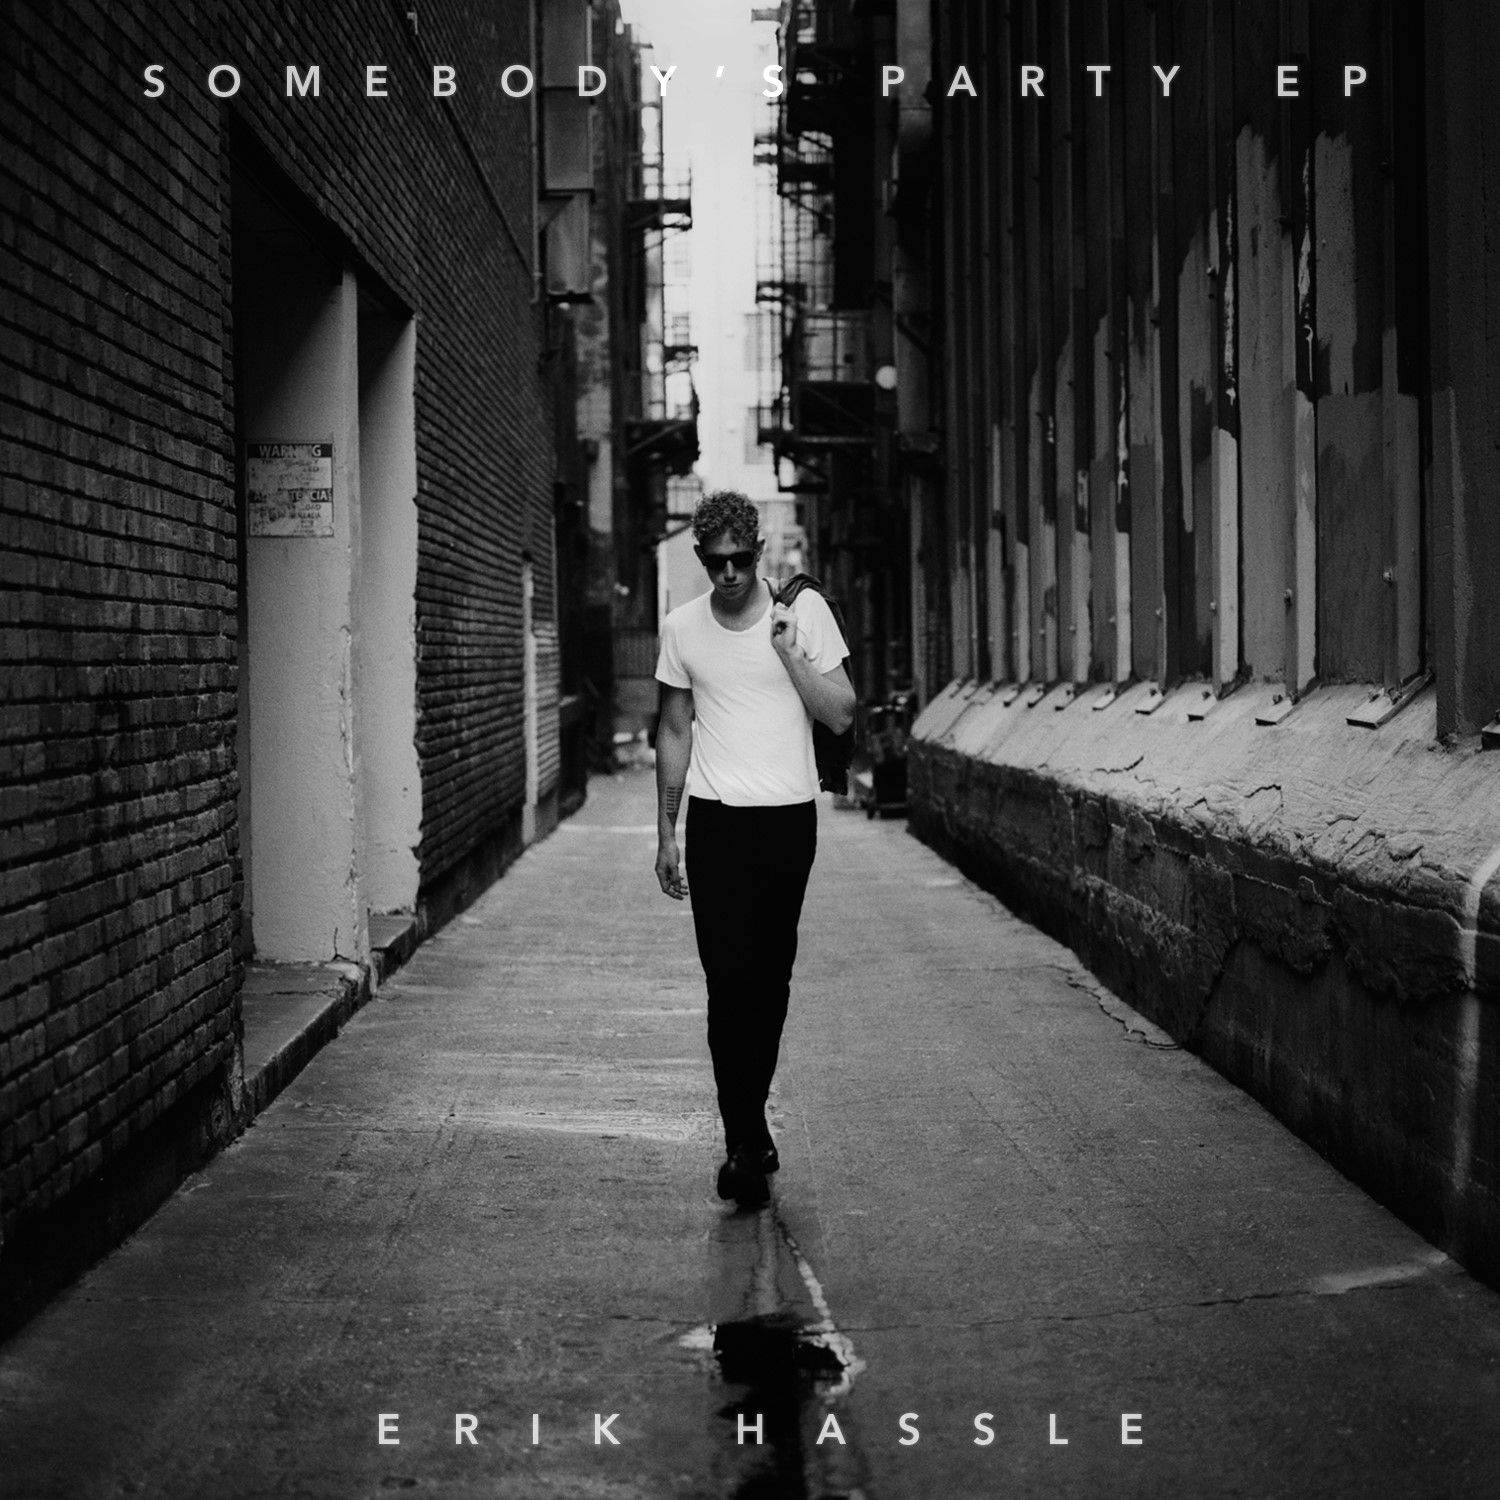 Somebody's Party EP